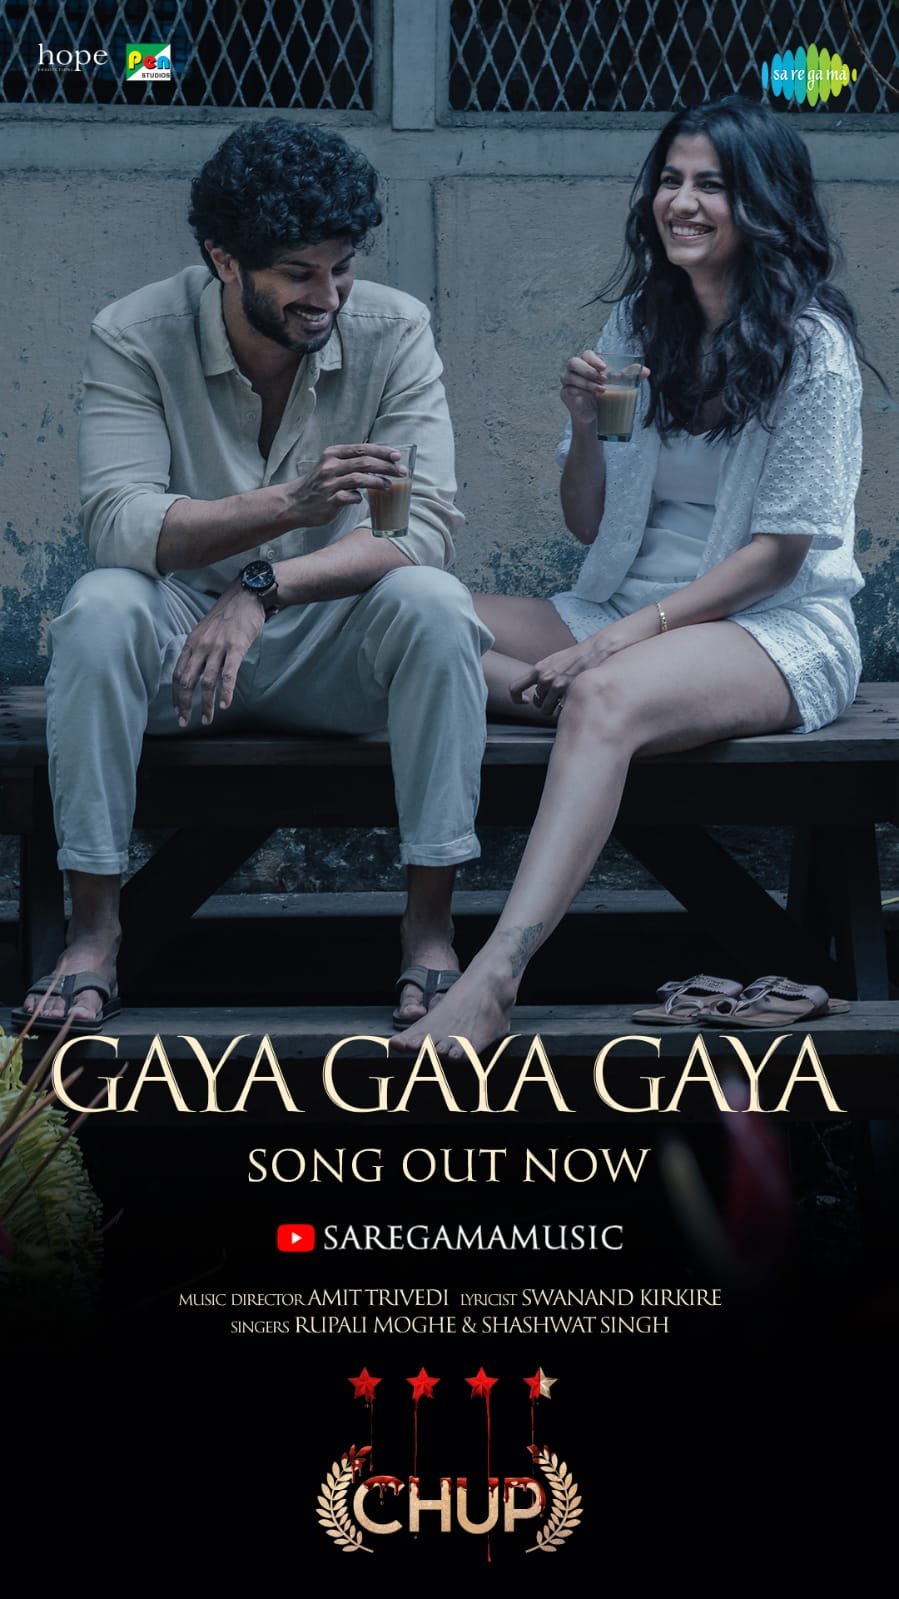 You are currently viewing The first song from R Balki’s Chup ‘Gaya Gaya Gaya’ out now!